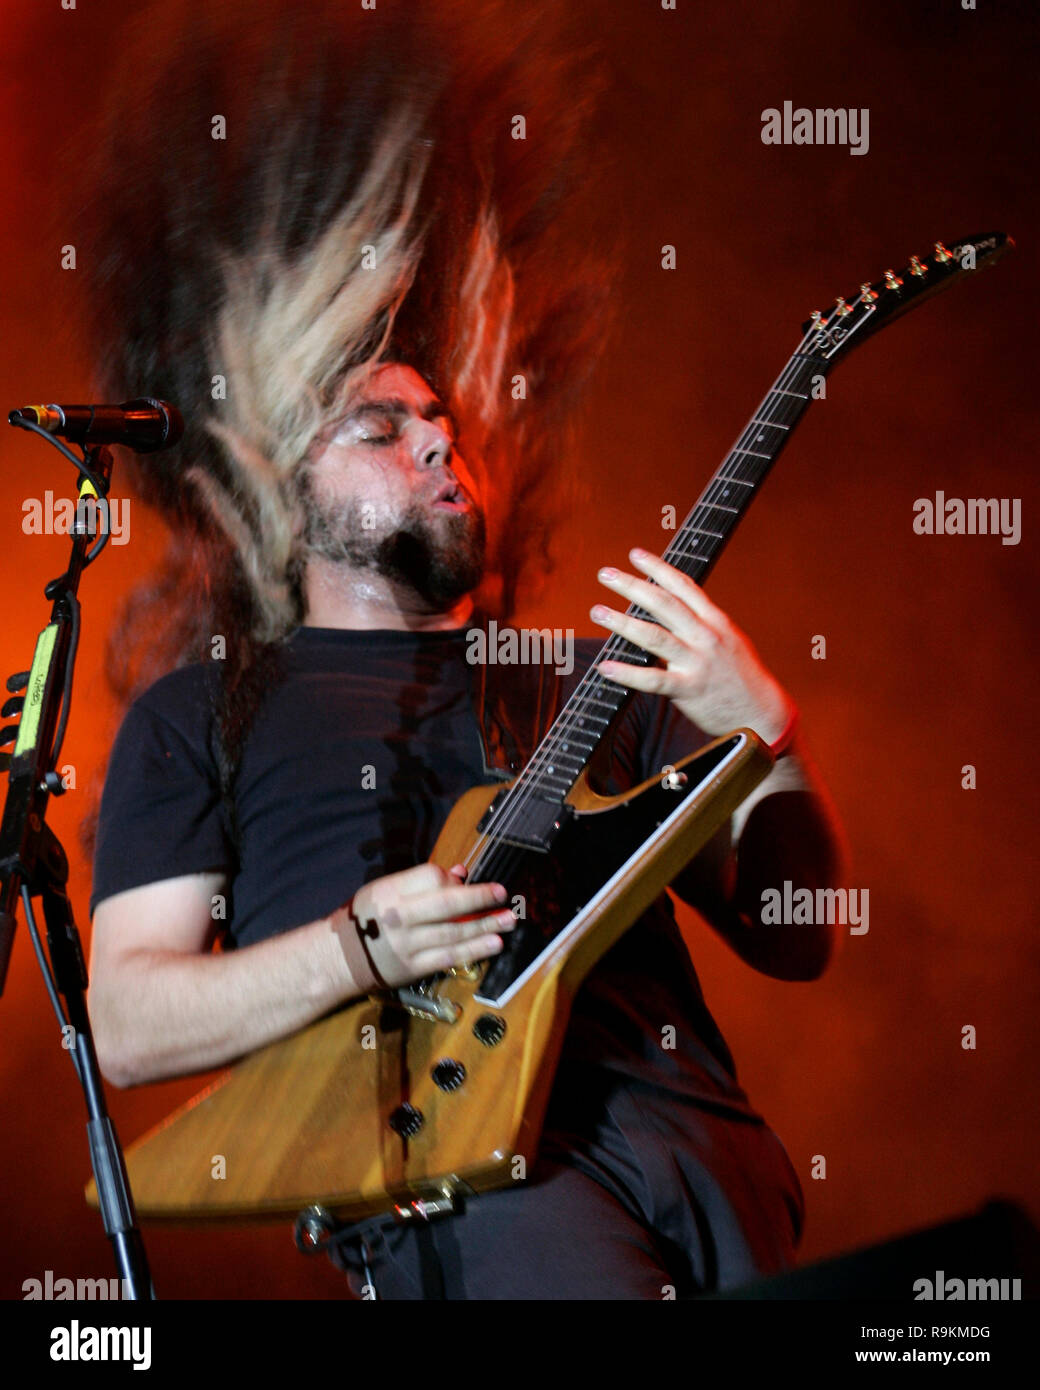 Claudio Sanchez with Coheed & Cambria perform in concert at the Global Gathering 2006 Festival at the Bicentennial Park in Miami, Florida on March 18, 2006. Stock Photo